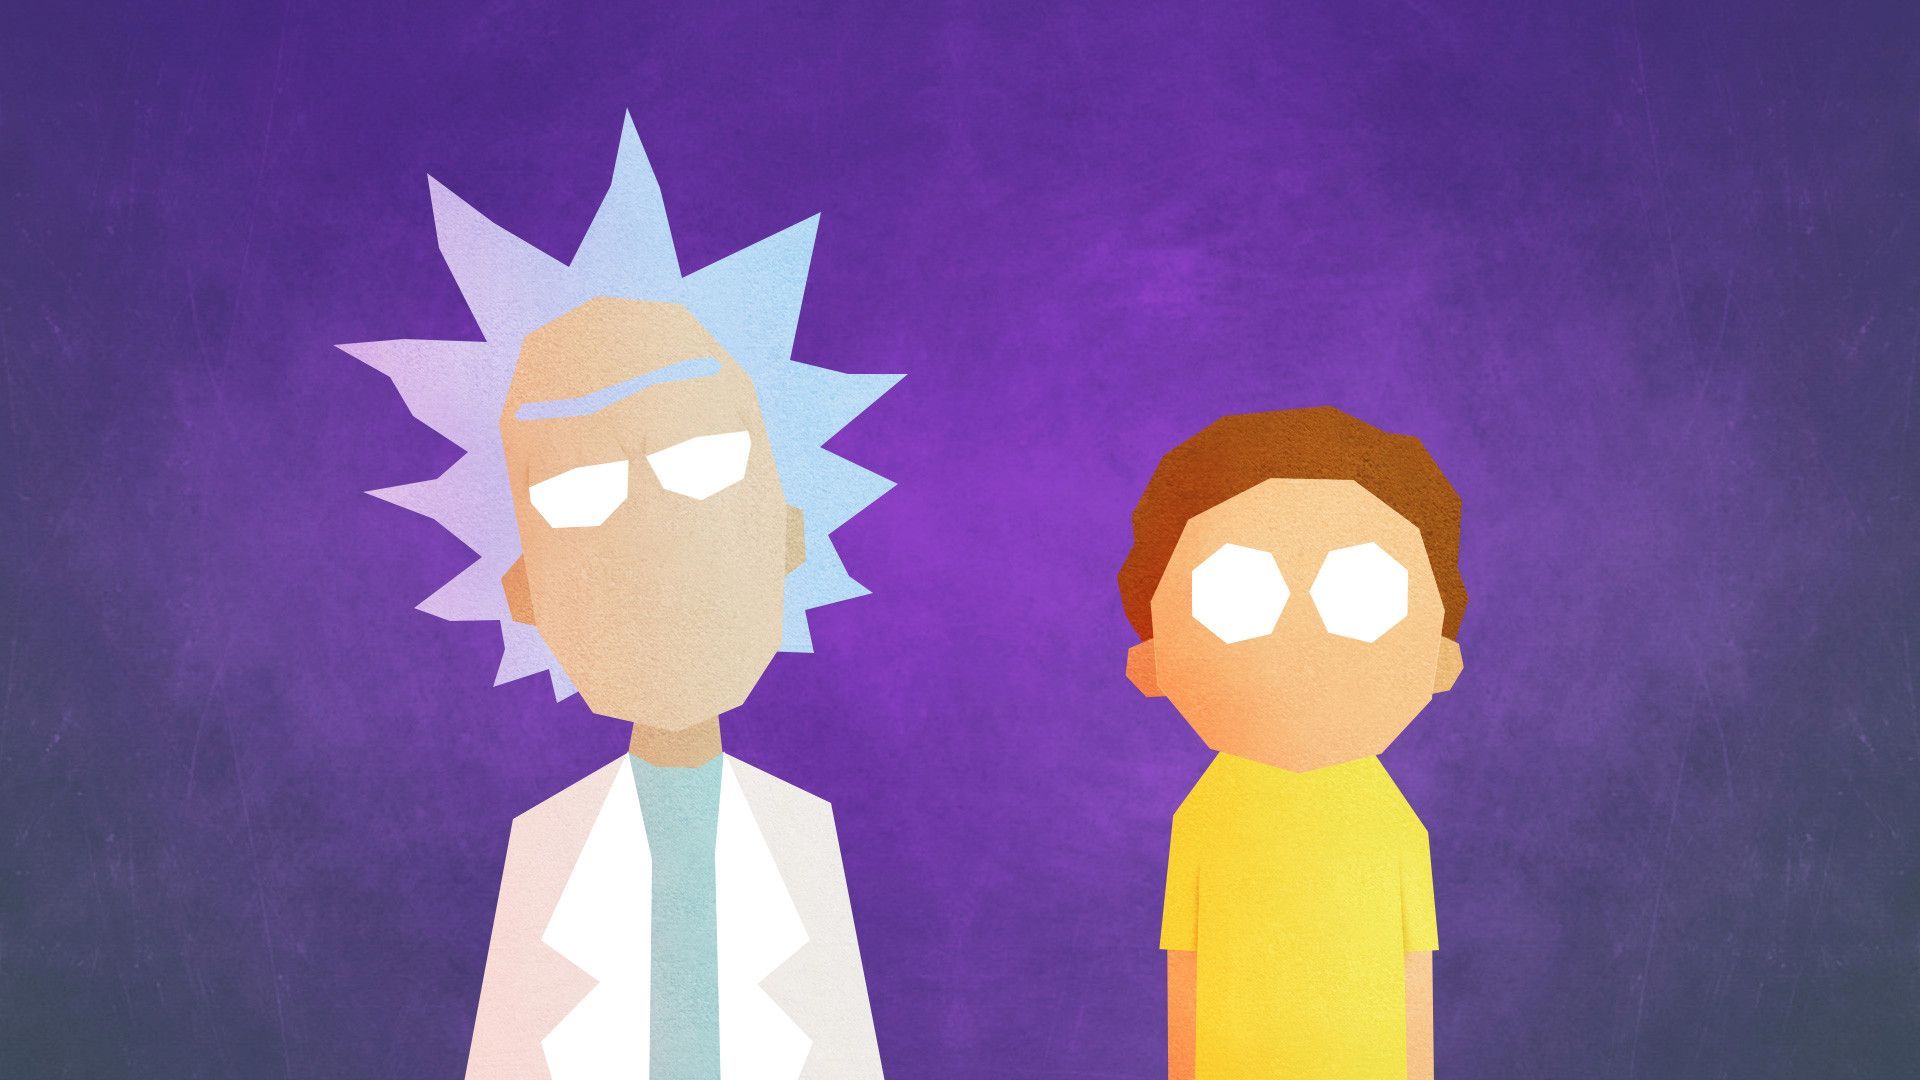 Download Rick And Morty Wallpaper Best Of Rick And Morty Pics HD